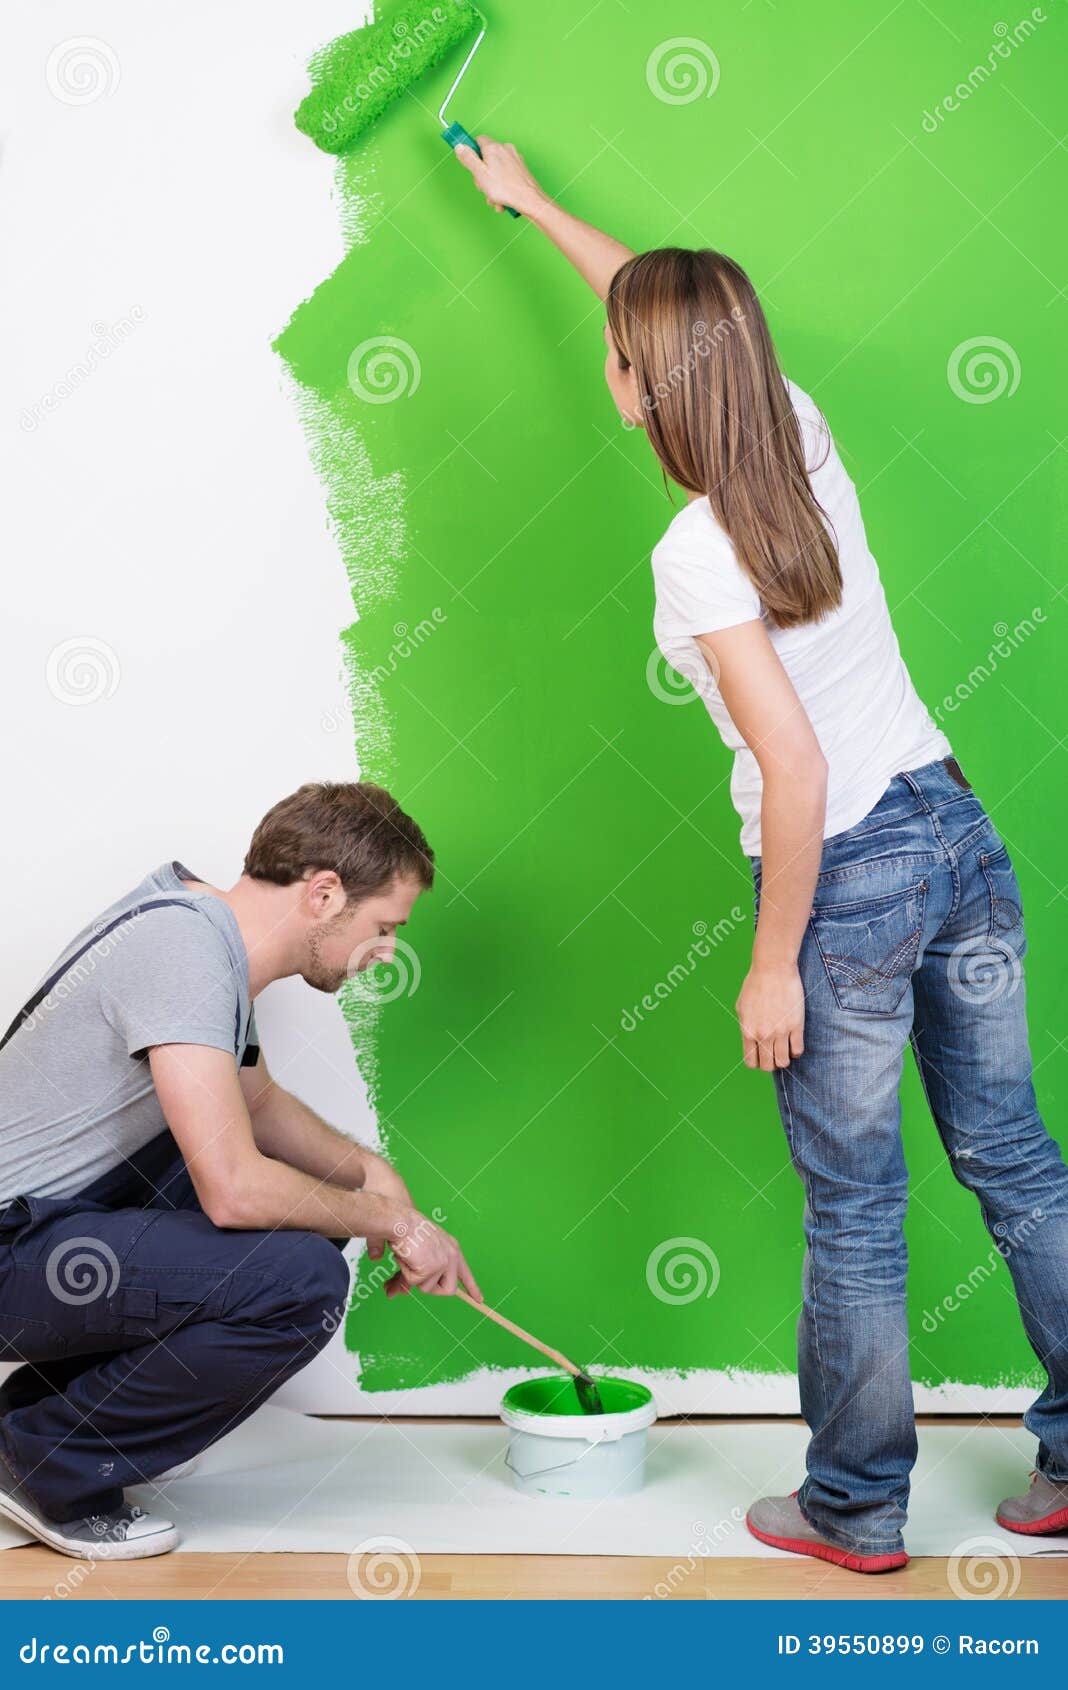 Young Couple Redecorating Their New Home Stock Image - Image of ...